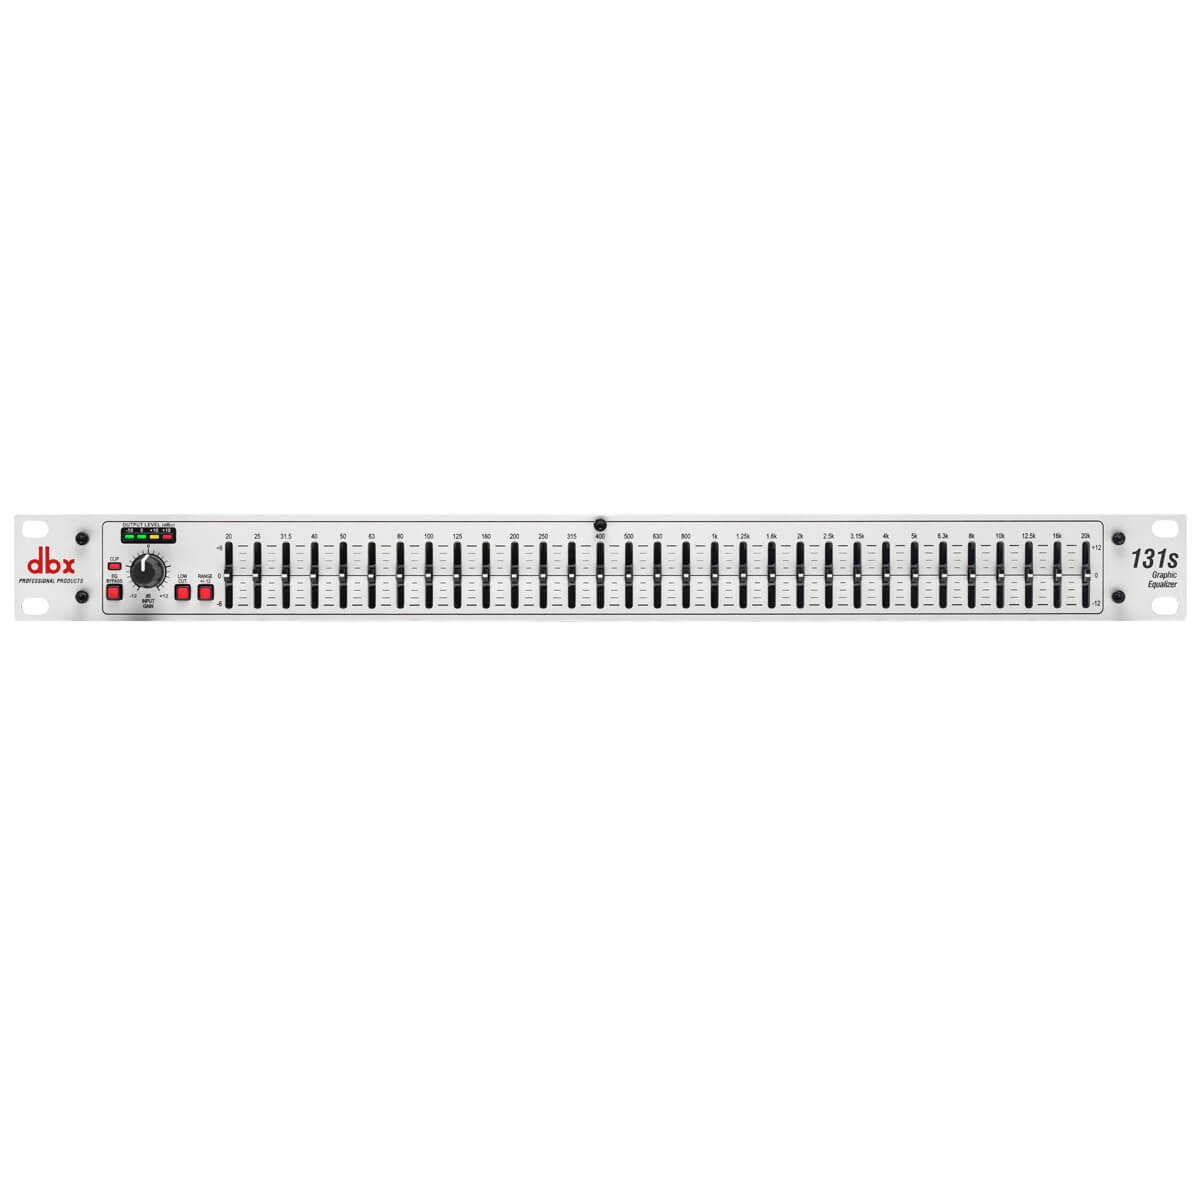 dbx 131s - Single 31-Band Graphic Equalizer, front